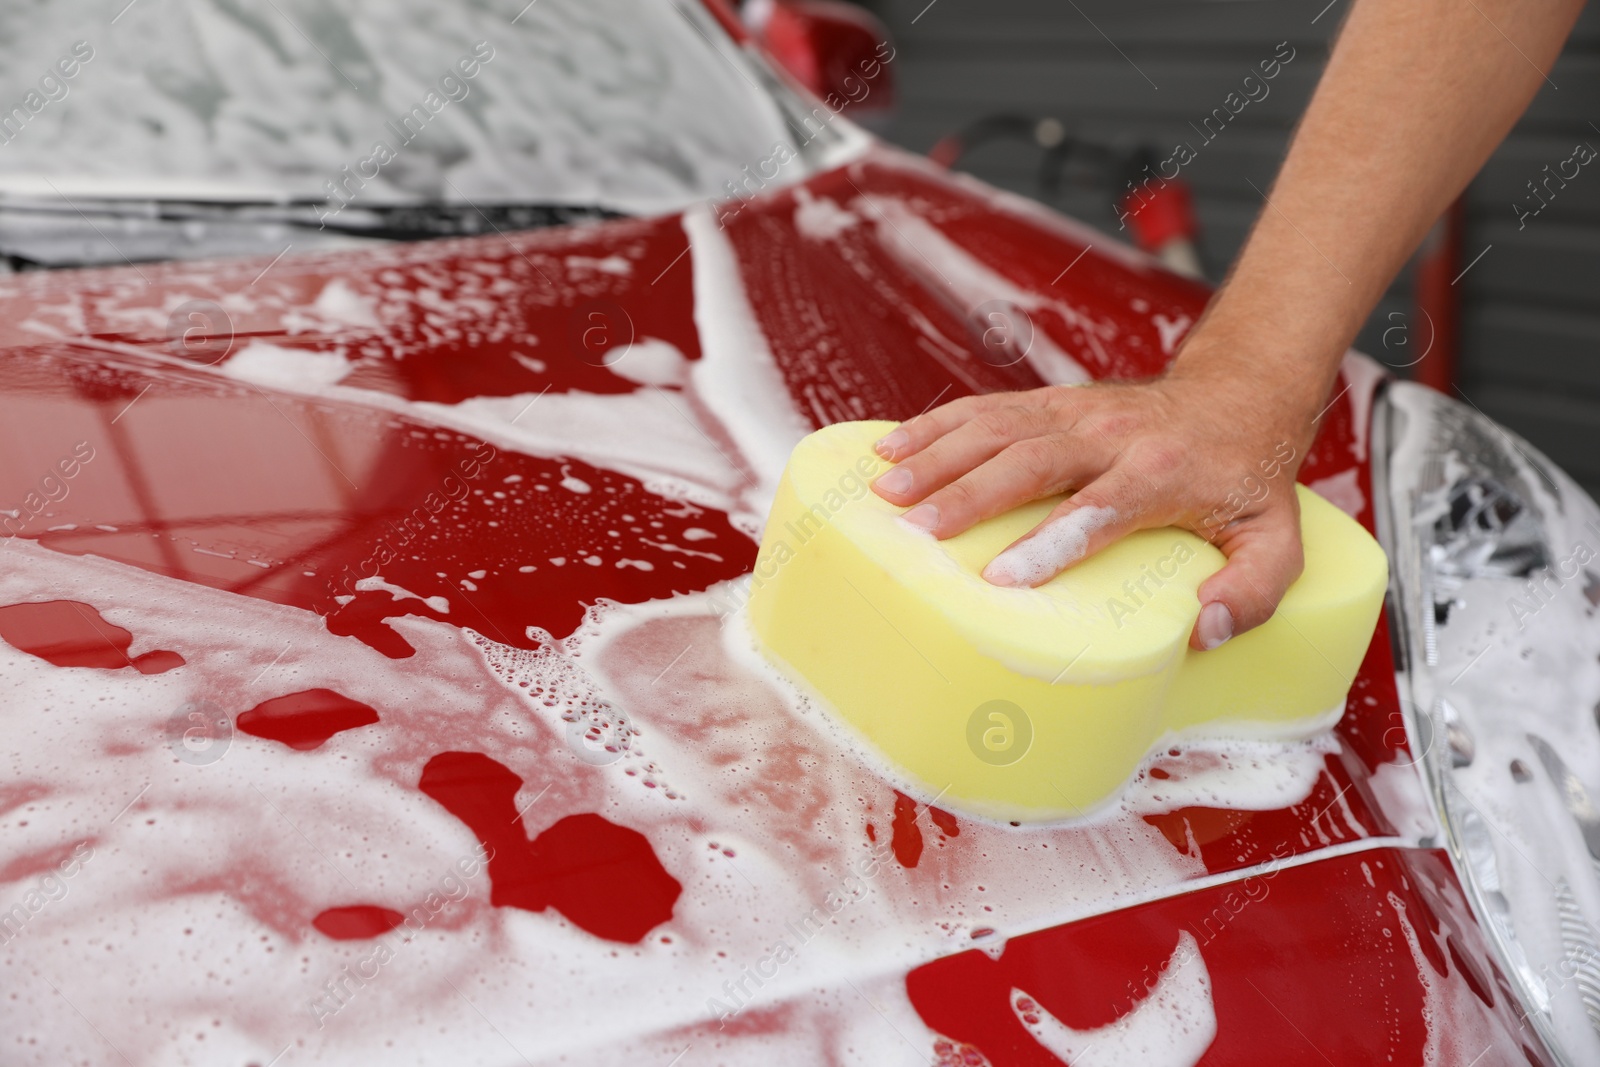 Photo of Man washing red auto with sponge at car wash, closeup